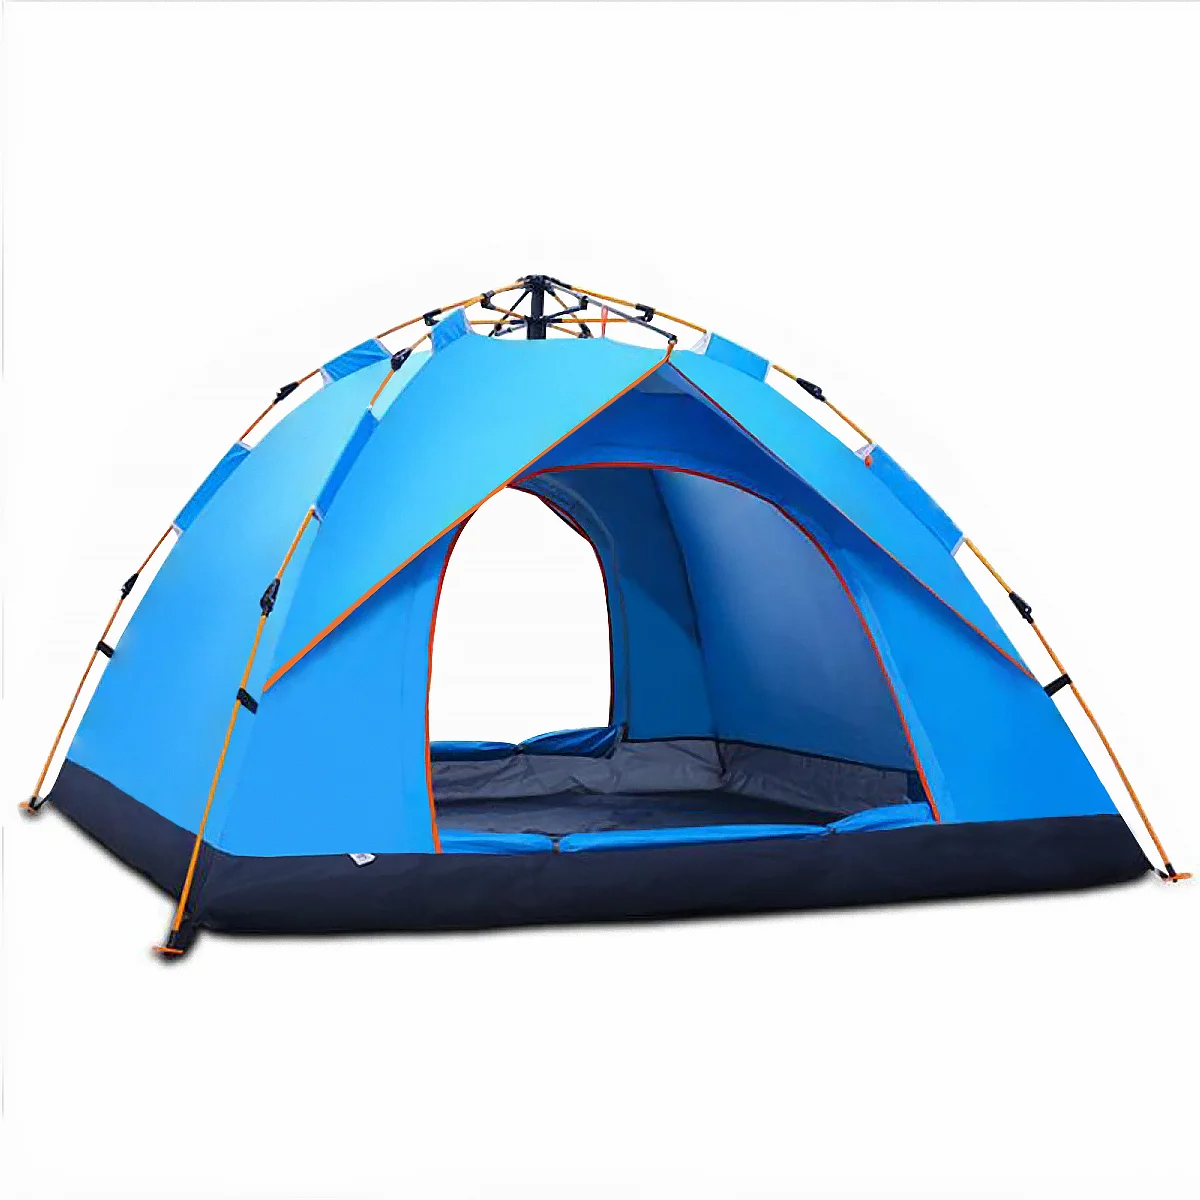 

Backpacking 3-4 1 Person Instant Outdoor Camping Tents automat for SaleEasy Quick Setup Dome Tend with Carrying Bag